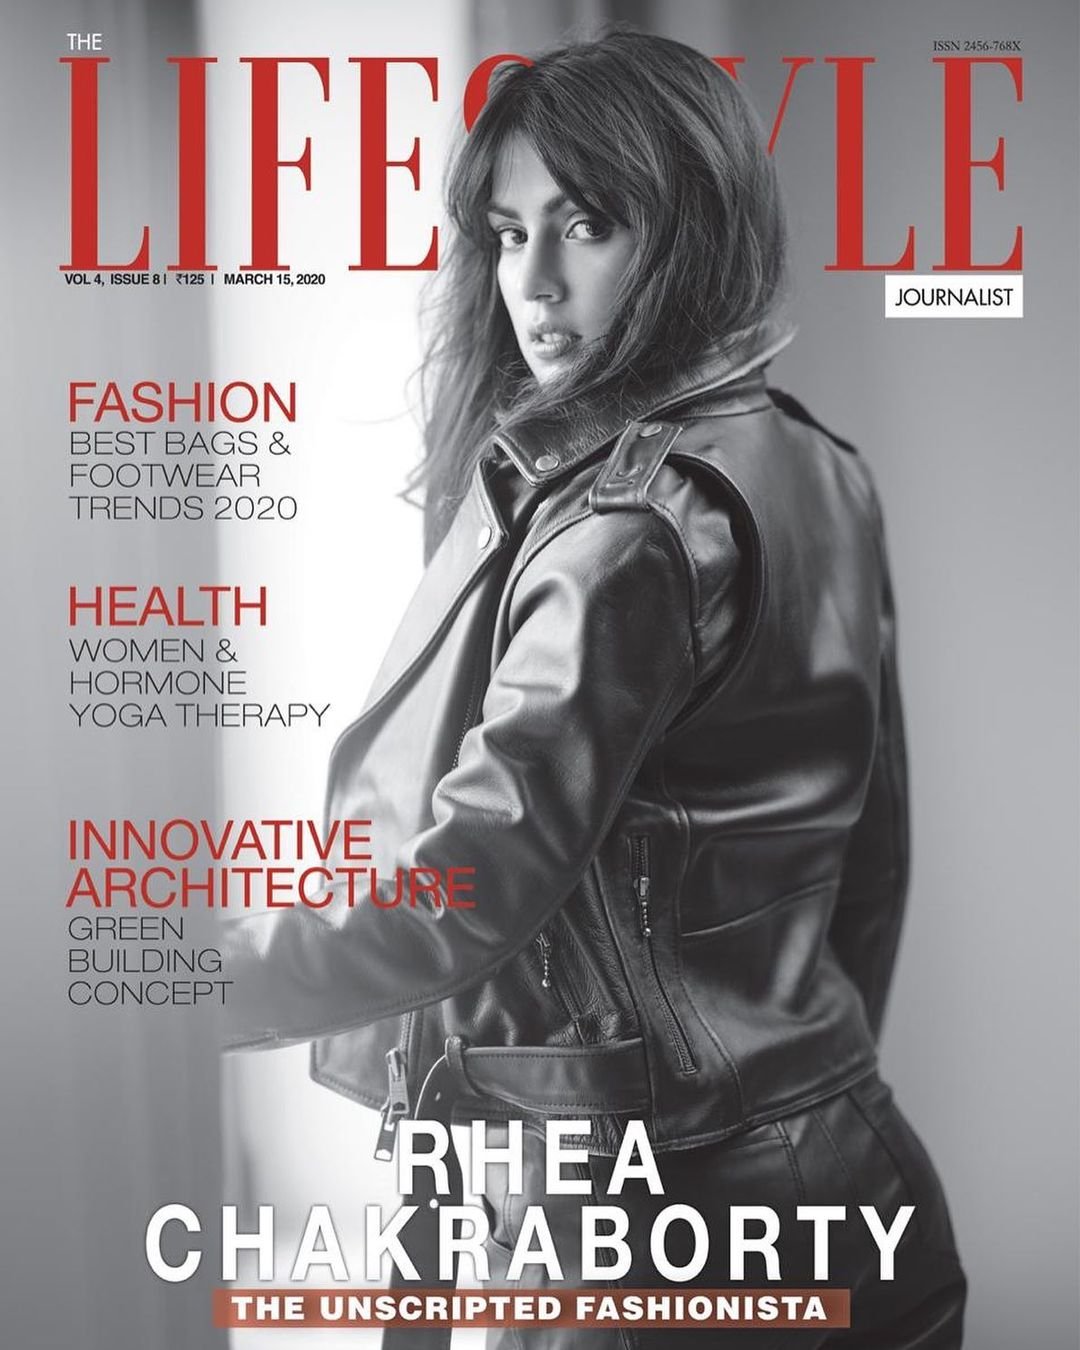 Rhea's Lifestyle Journalist Vol 4 Issue 8 (March 15, 2020) Edition